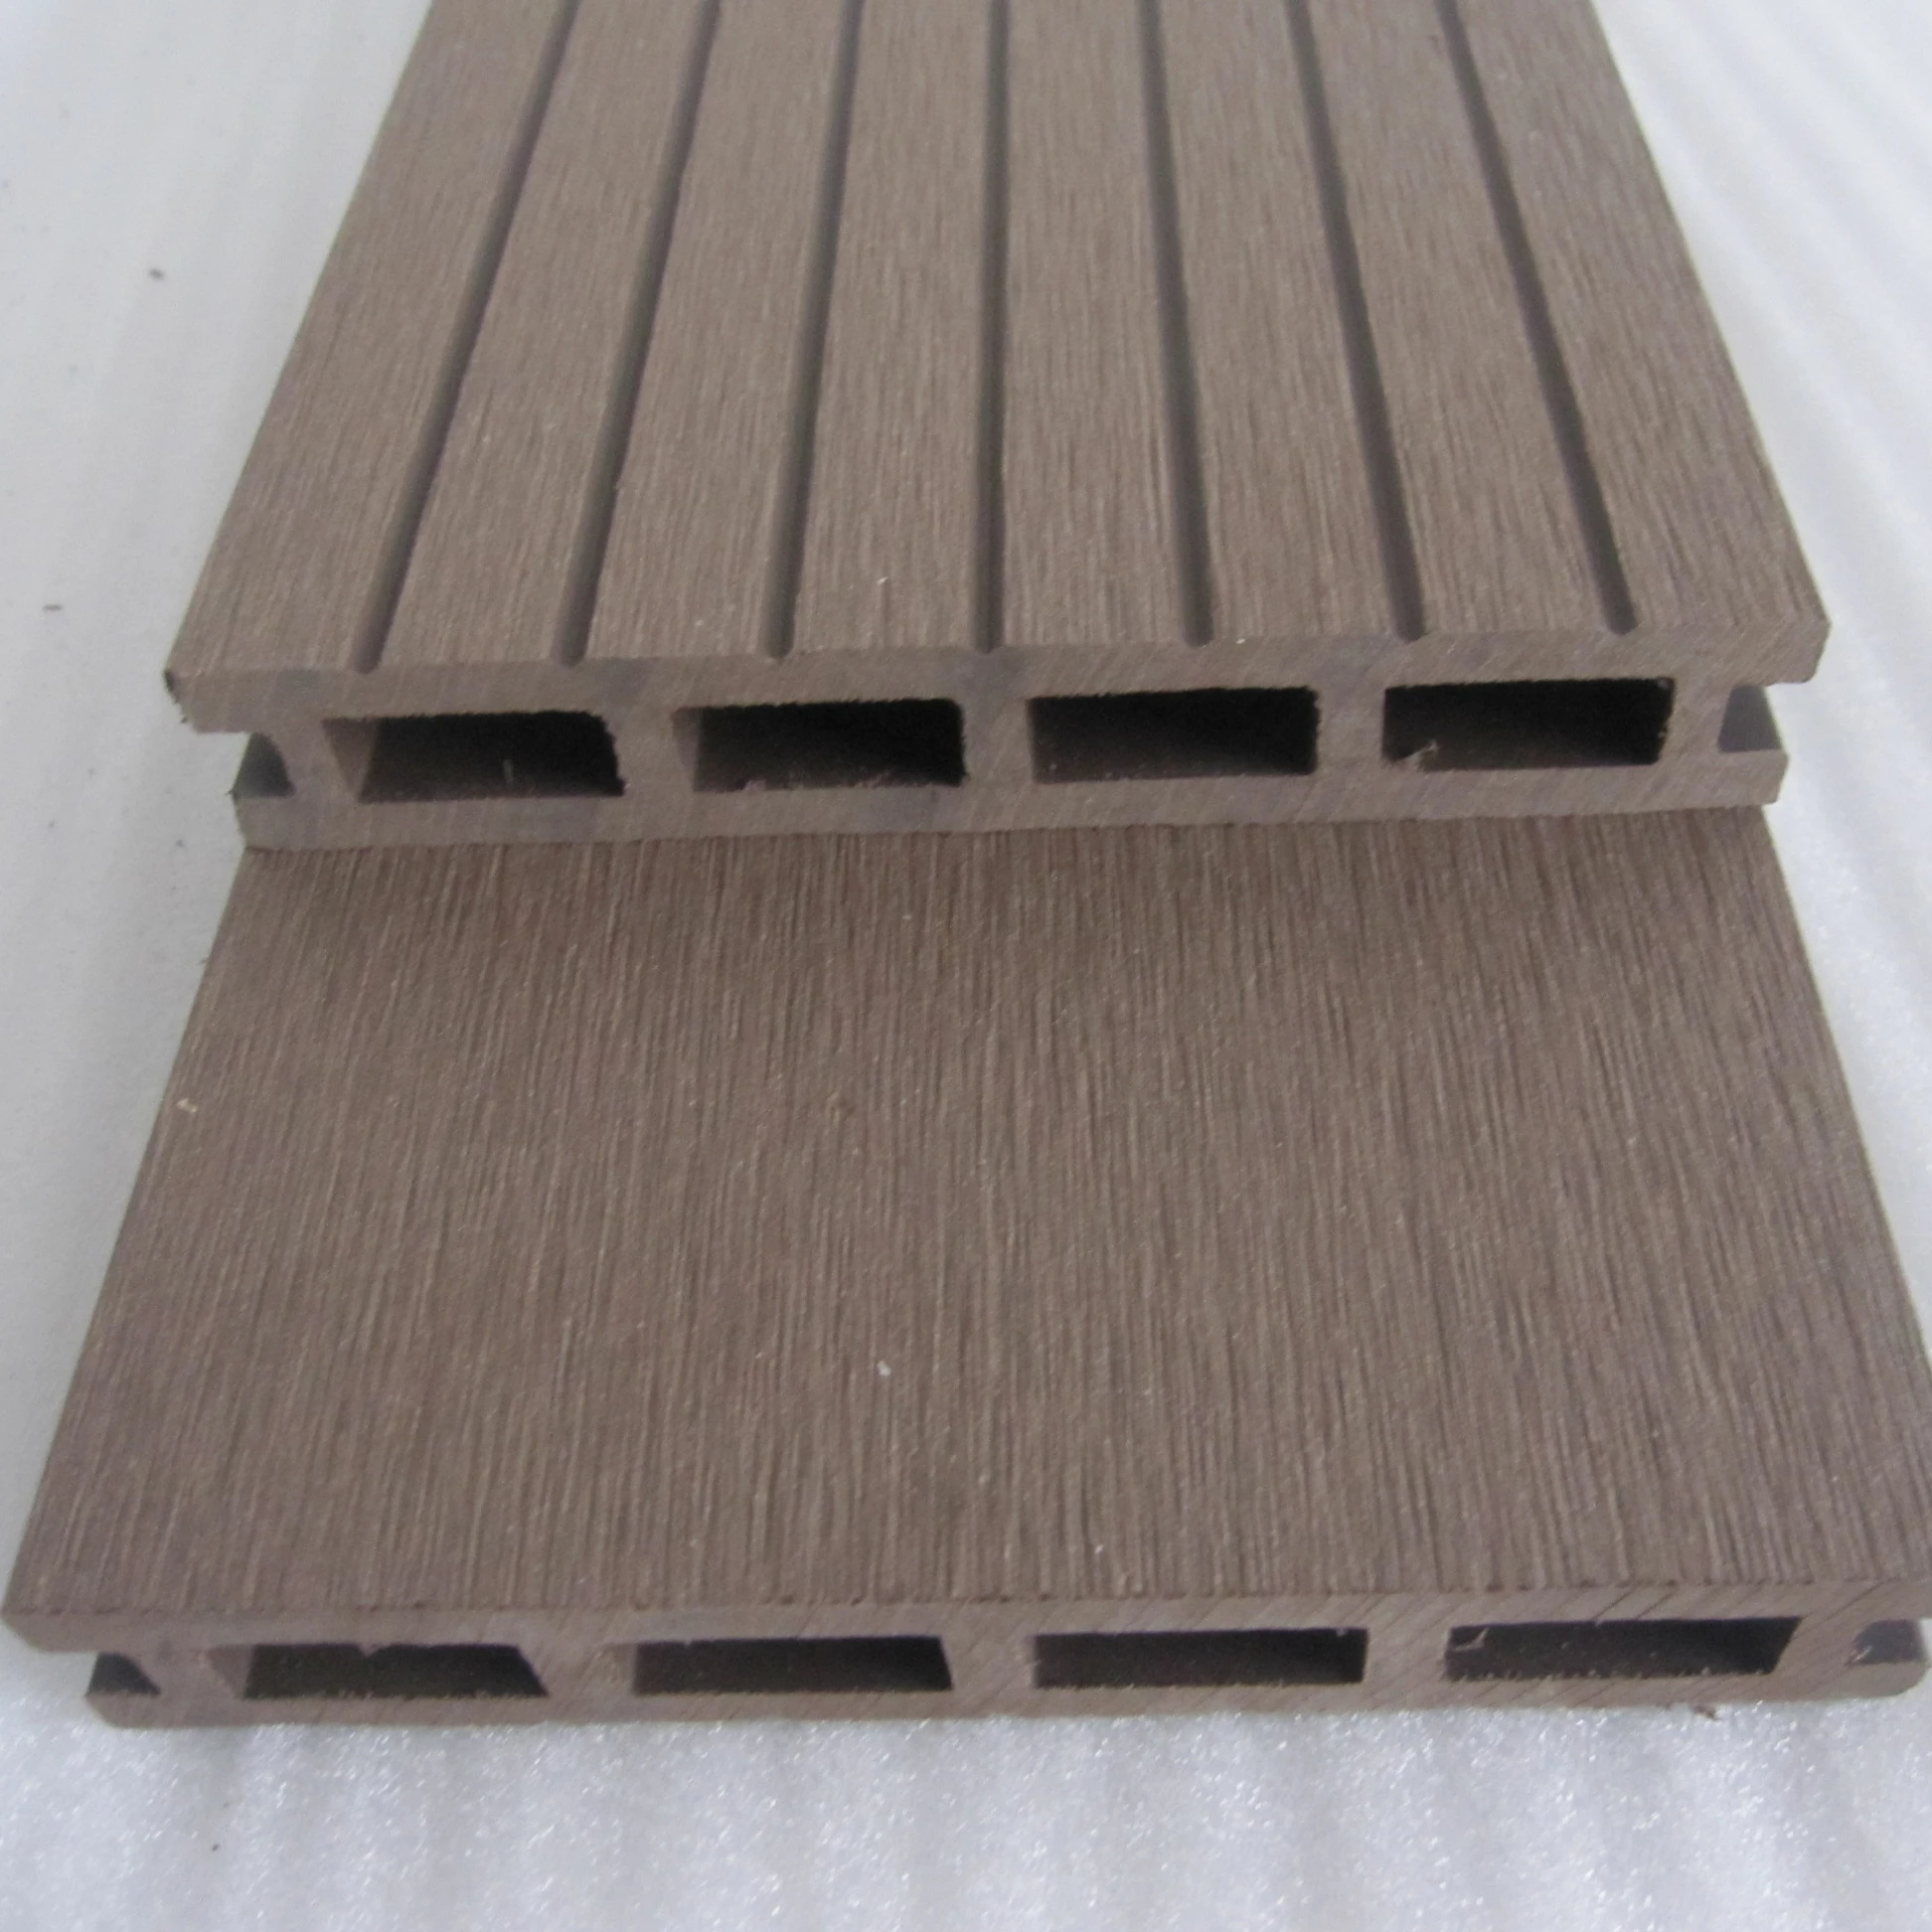 Wood plastic composite decking factory price CE shera wood planks supplier